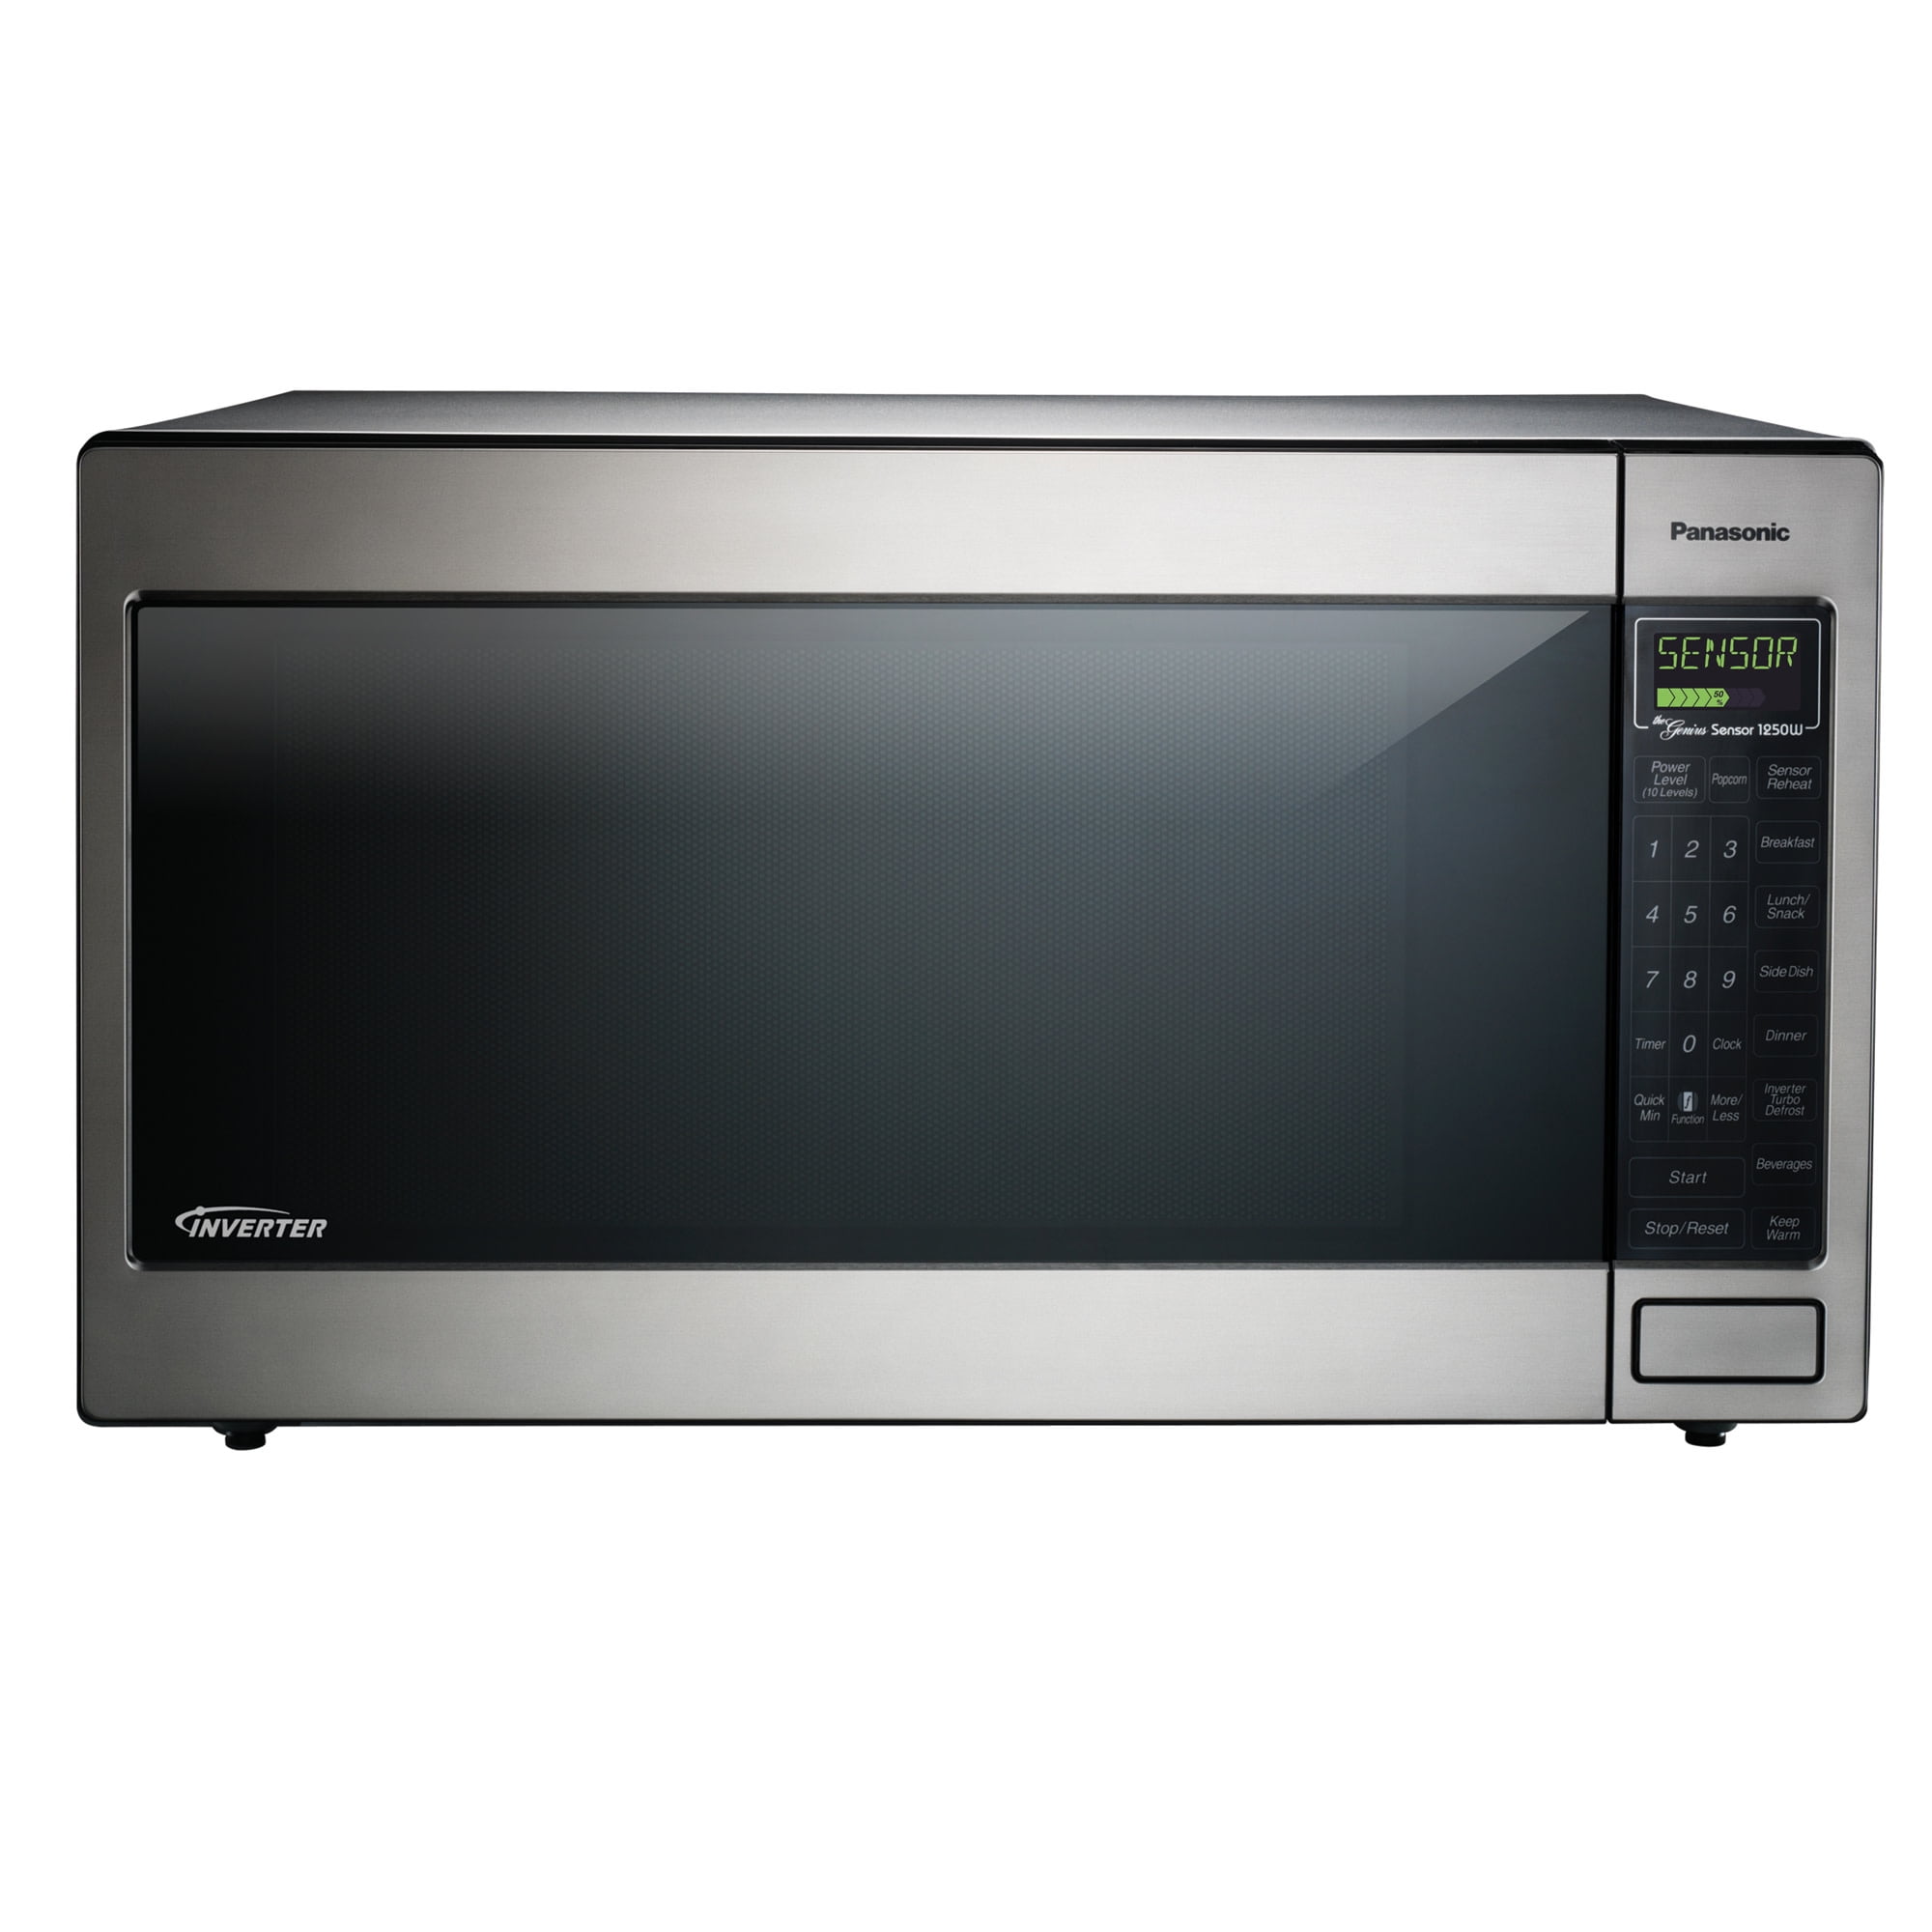 Panasonic 2.2 cu. ft. 1250W Countertop Microwave Oven with Inverter